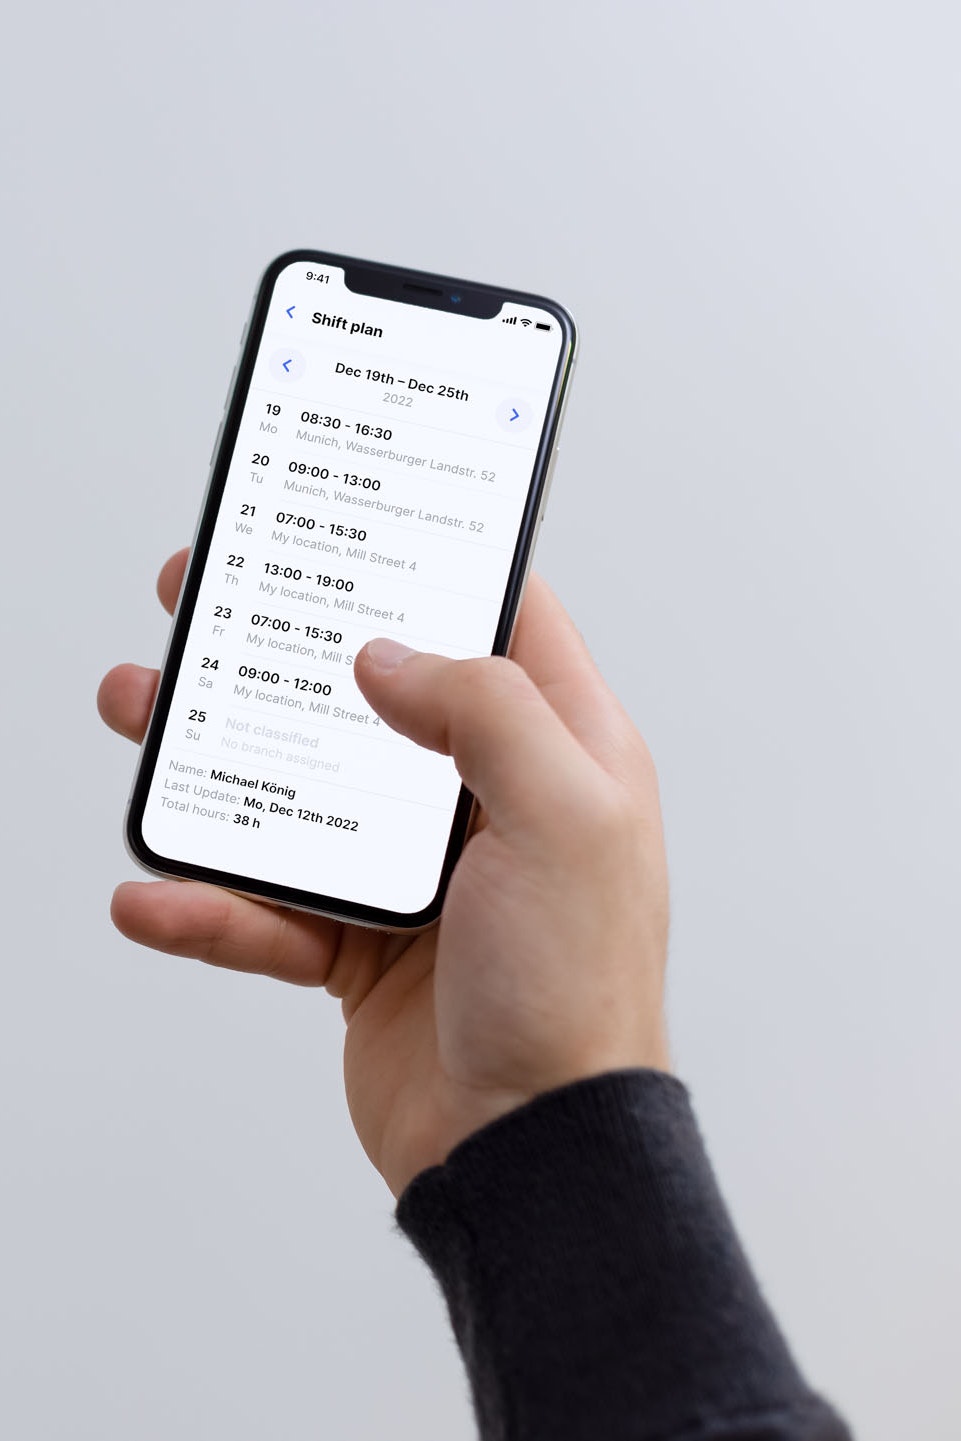 Smartphone mockup shows an integrated shift plan